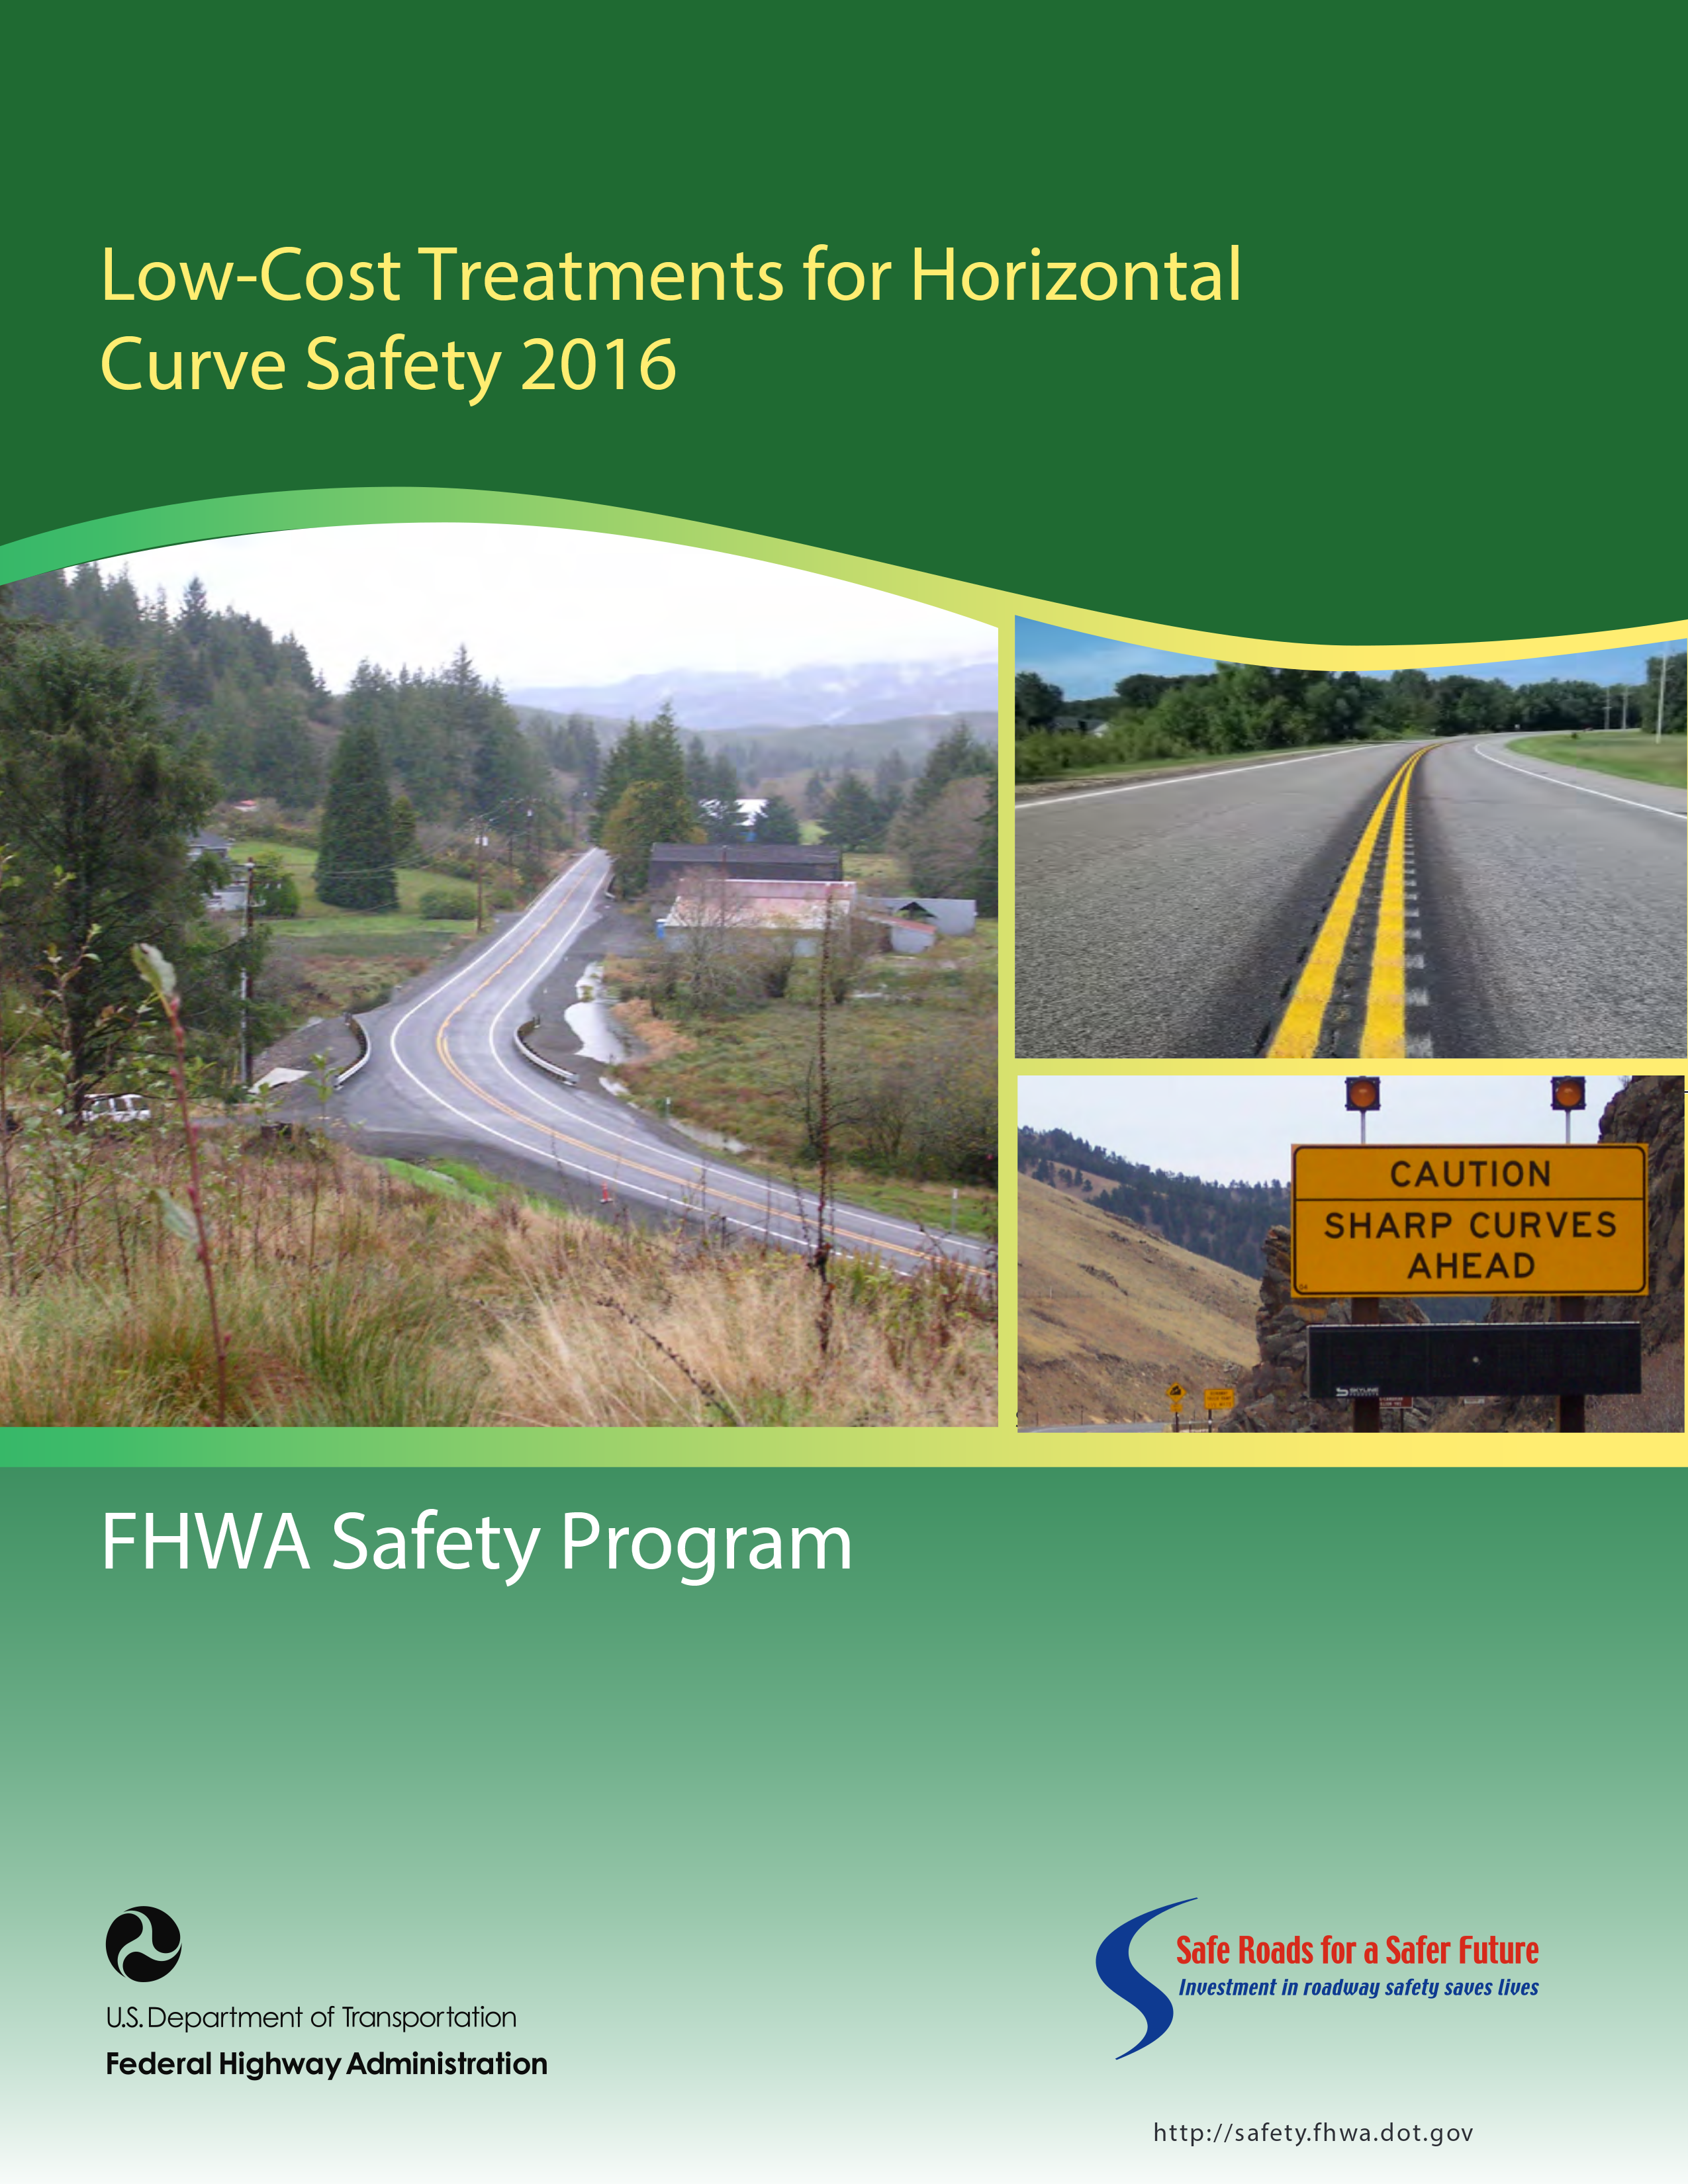 Low-Cost Treatments for Horizontal Curve Safety 2016